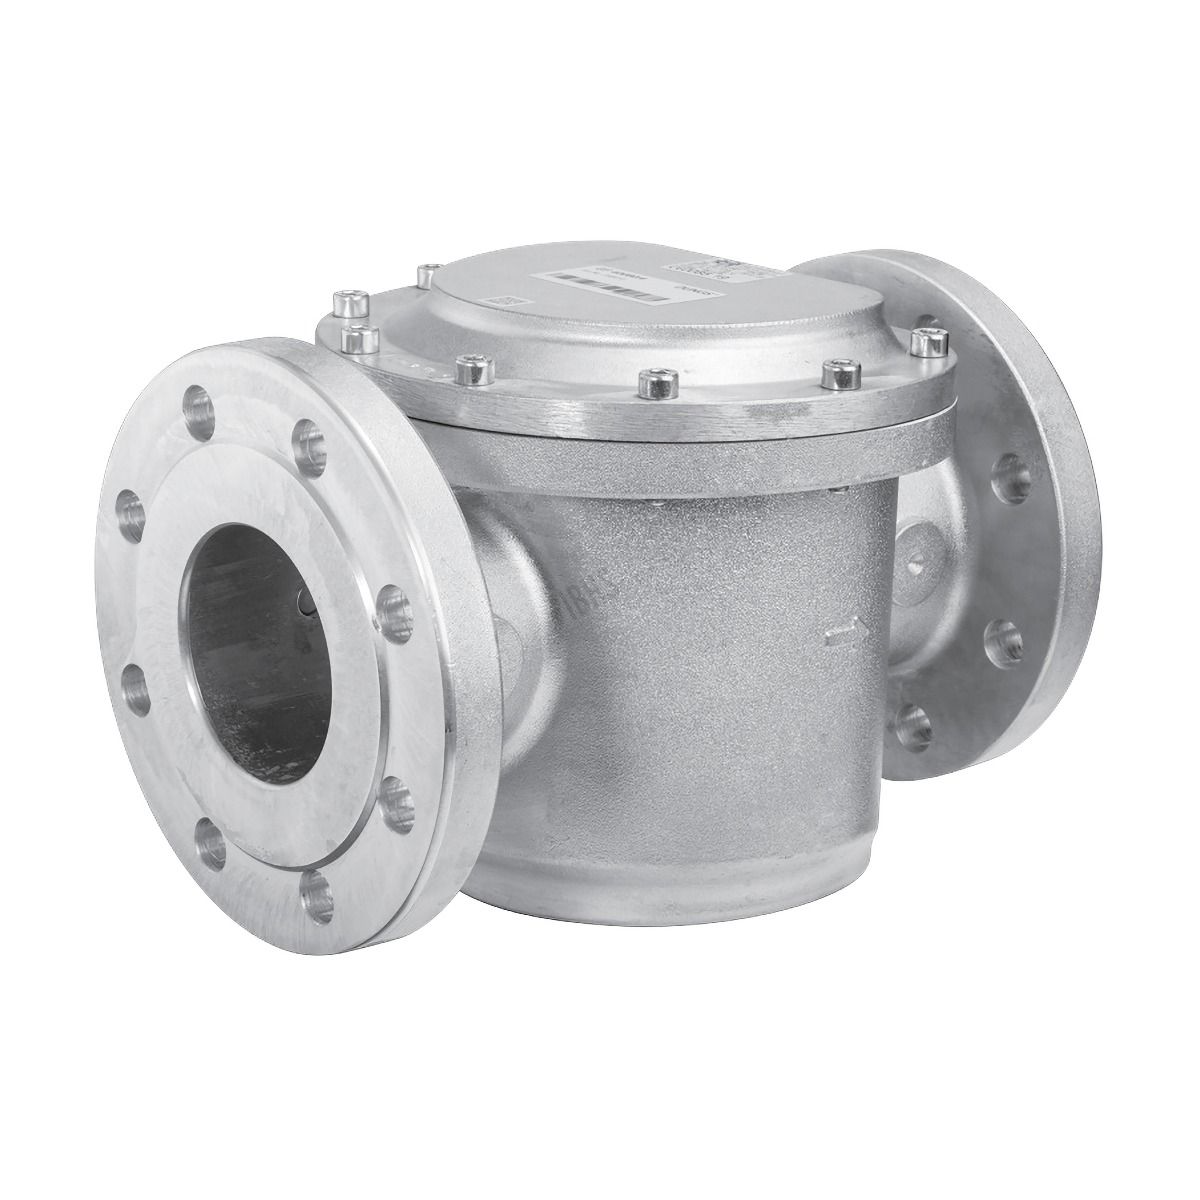 125mm Flanged PN16 Gas Filter 6 Bar Max Operating Pressure